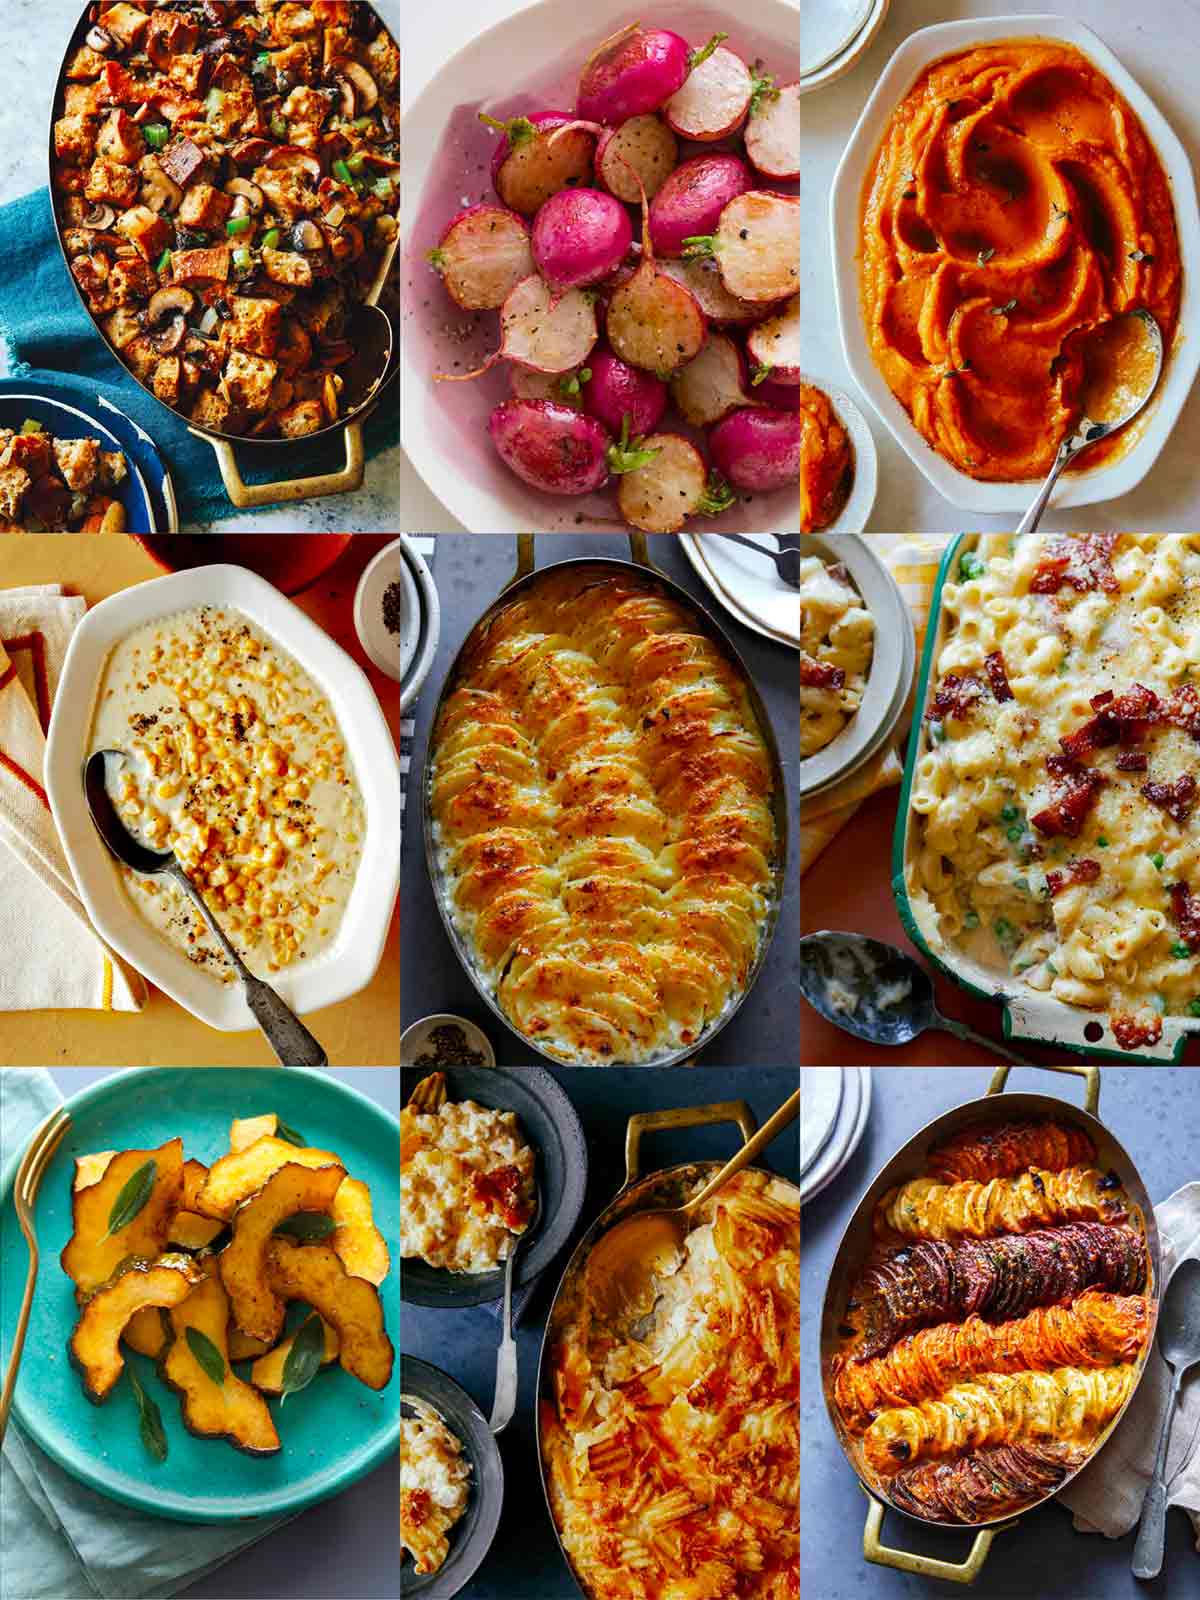 How to upgrade your Thanksgiving side dishes